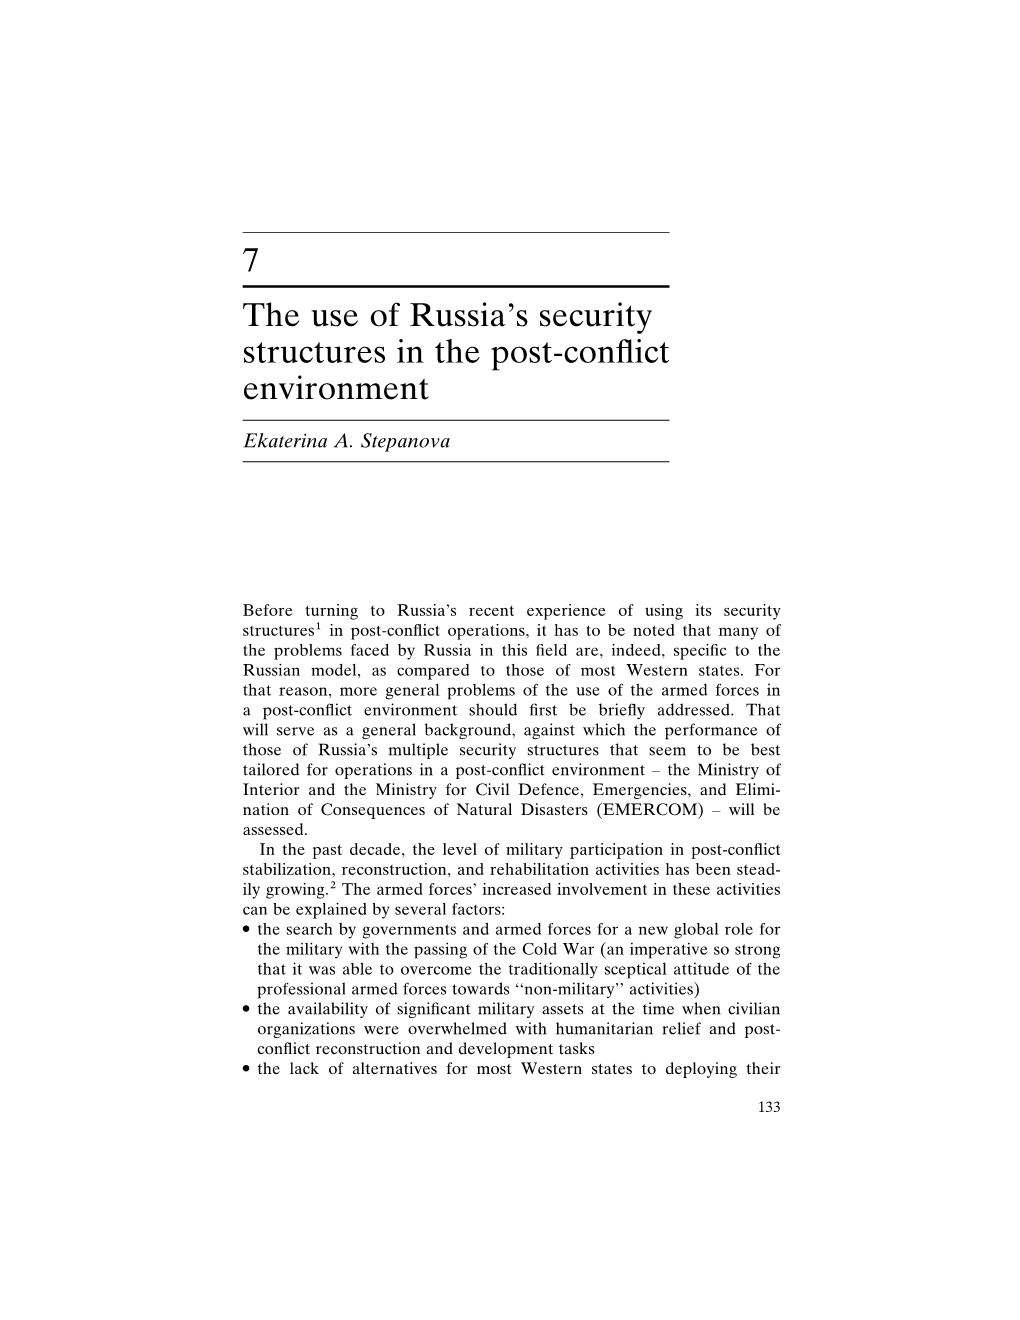 The Use of Russia's Security Forces in Post-Conflict Environment